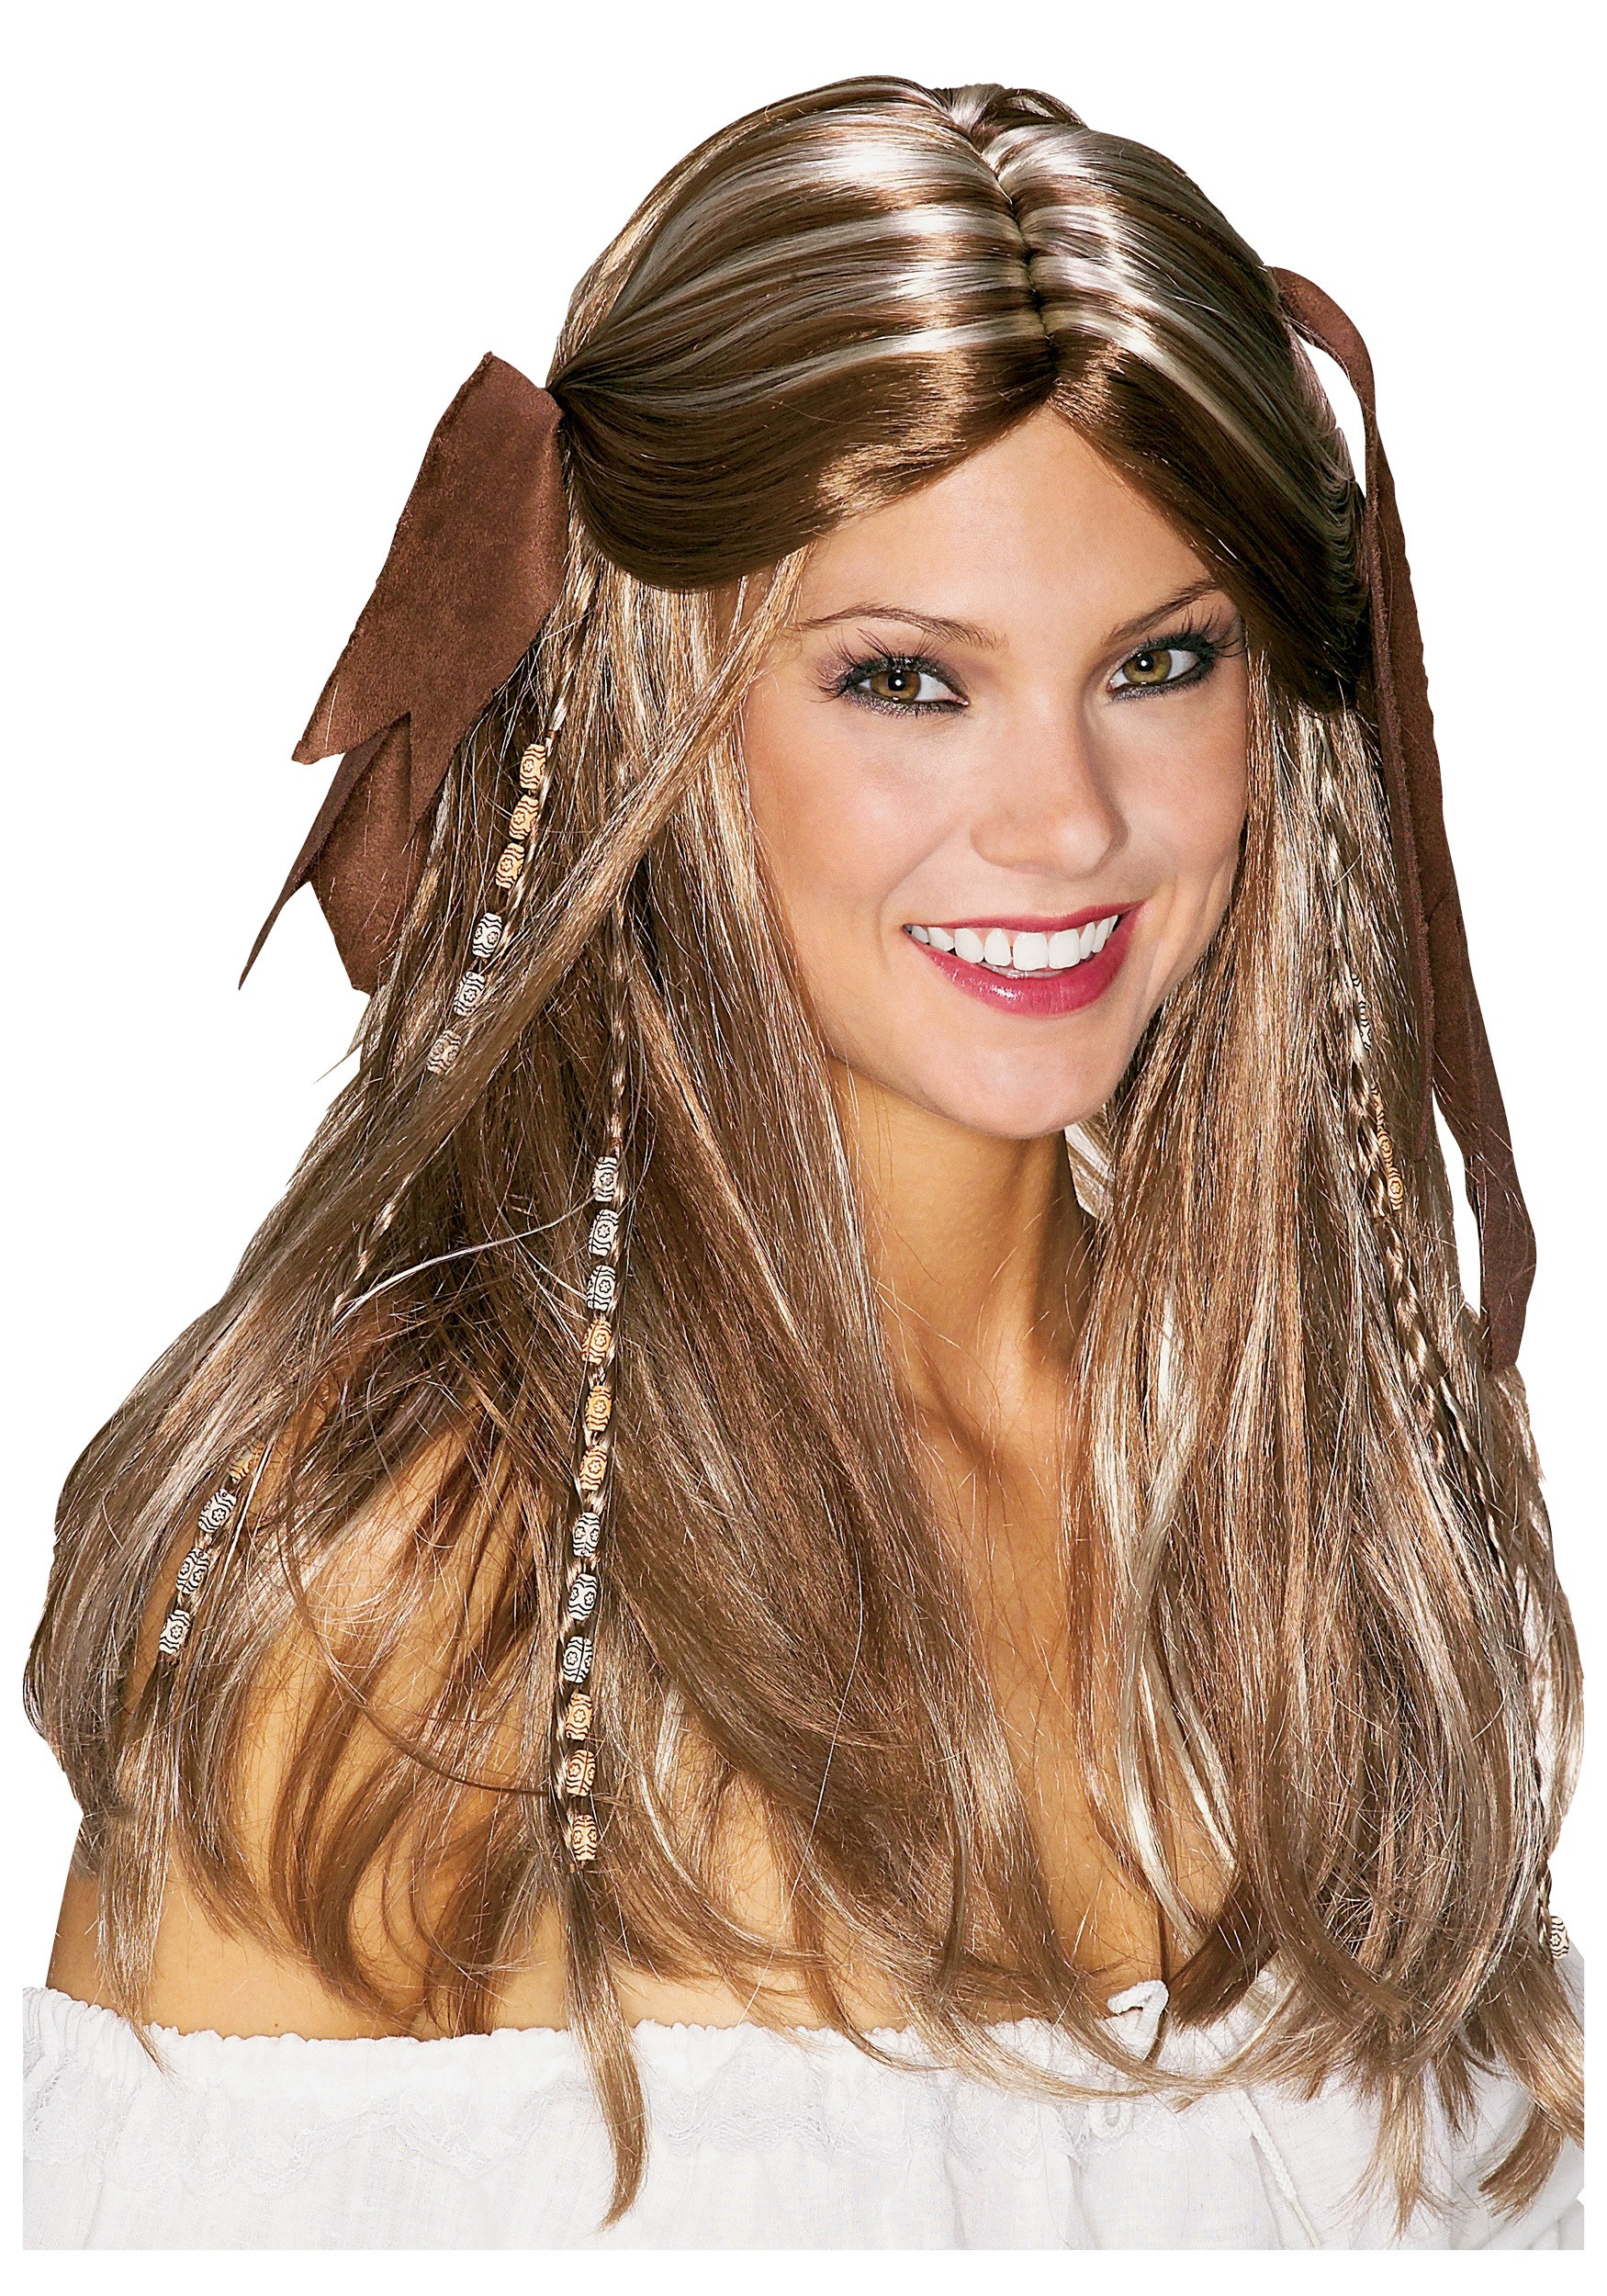 Pirate Hairstyles Female
 Female Pirate Hairstyles